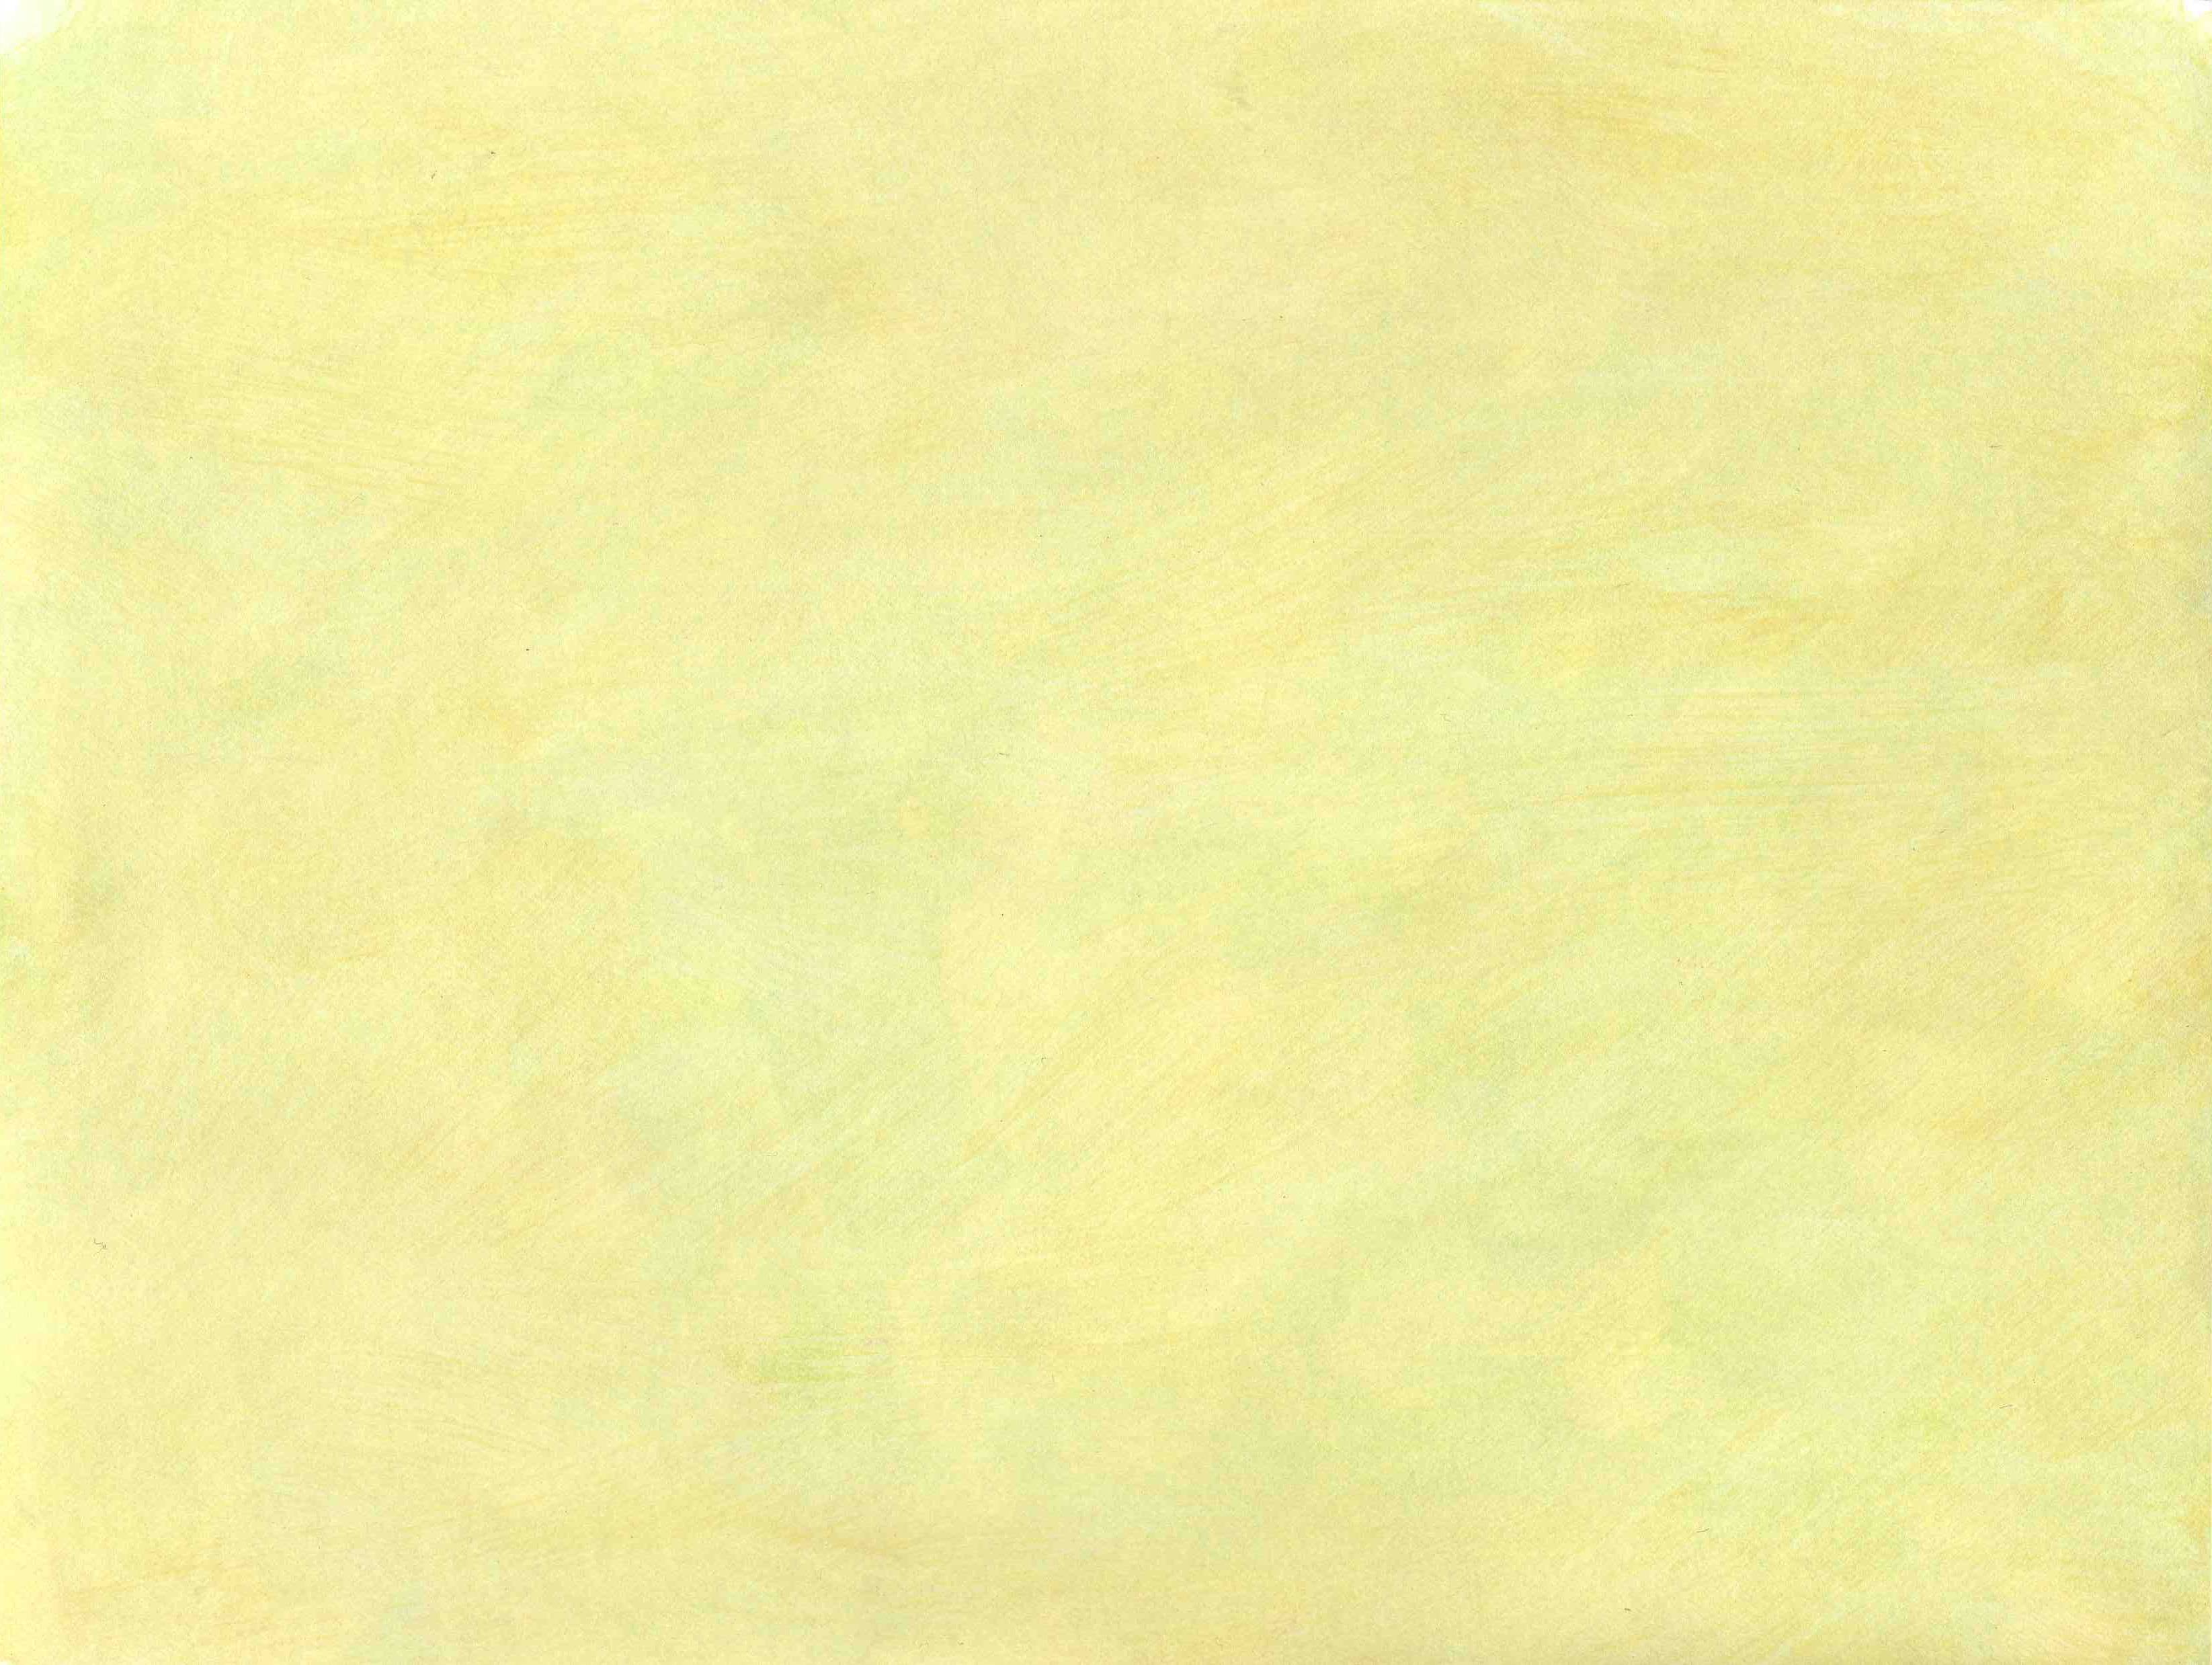 Free download Wallpaper For Pale Yellow Background Image [3291x2477] for your Desktop, Mobile & Tablet. Explore Light Yellow Wallpaper. Yellow Floral Wallpaper, Light Blue and Yellow Wallpaper, Yellow and Red Wallpaper